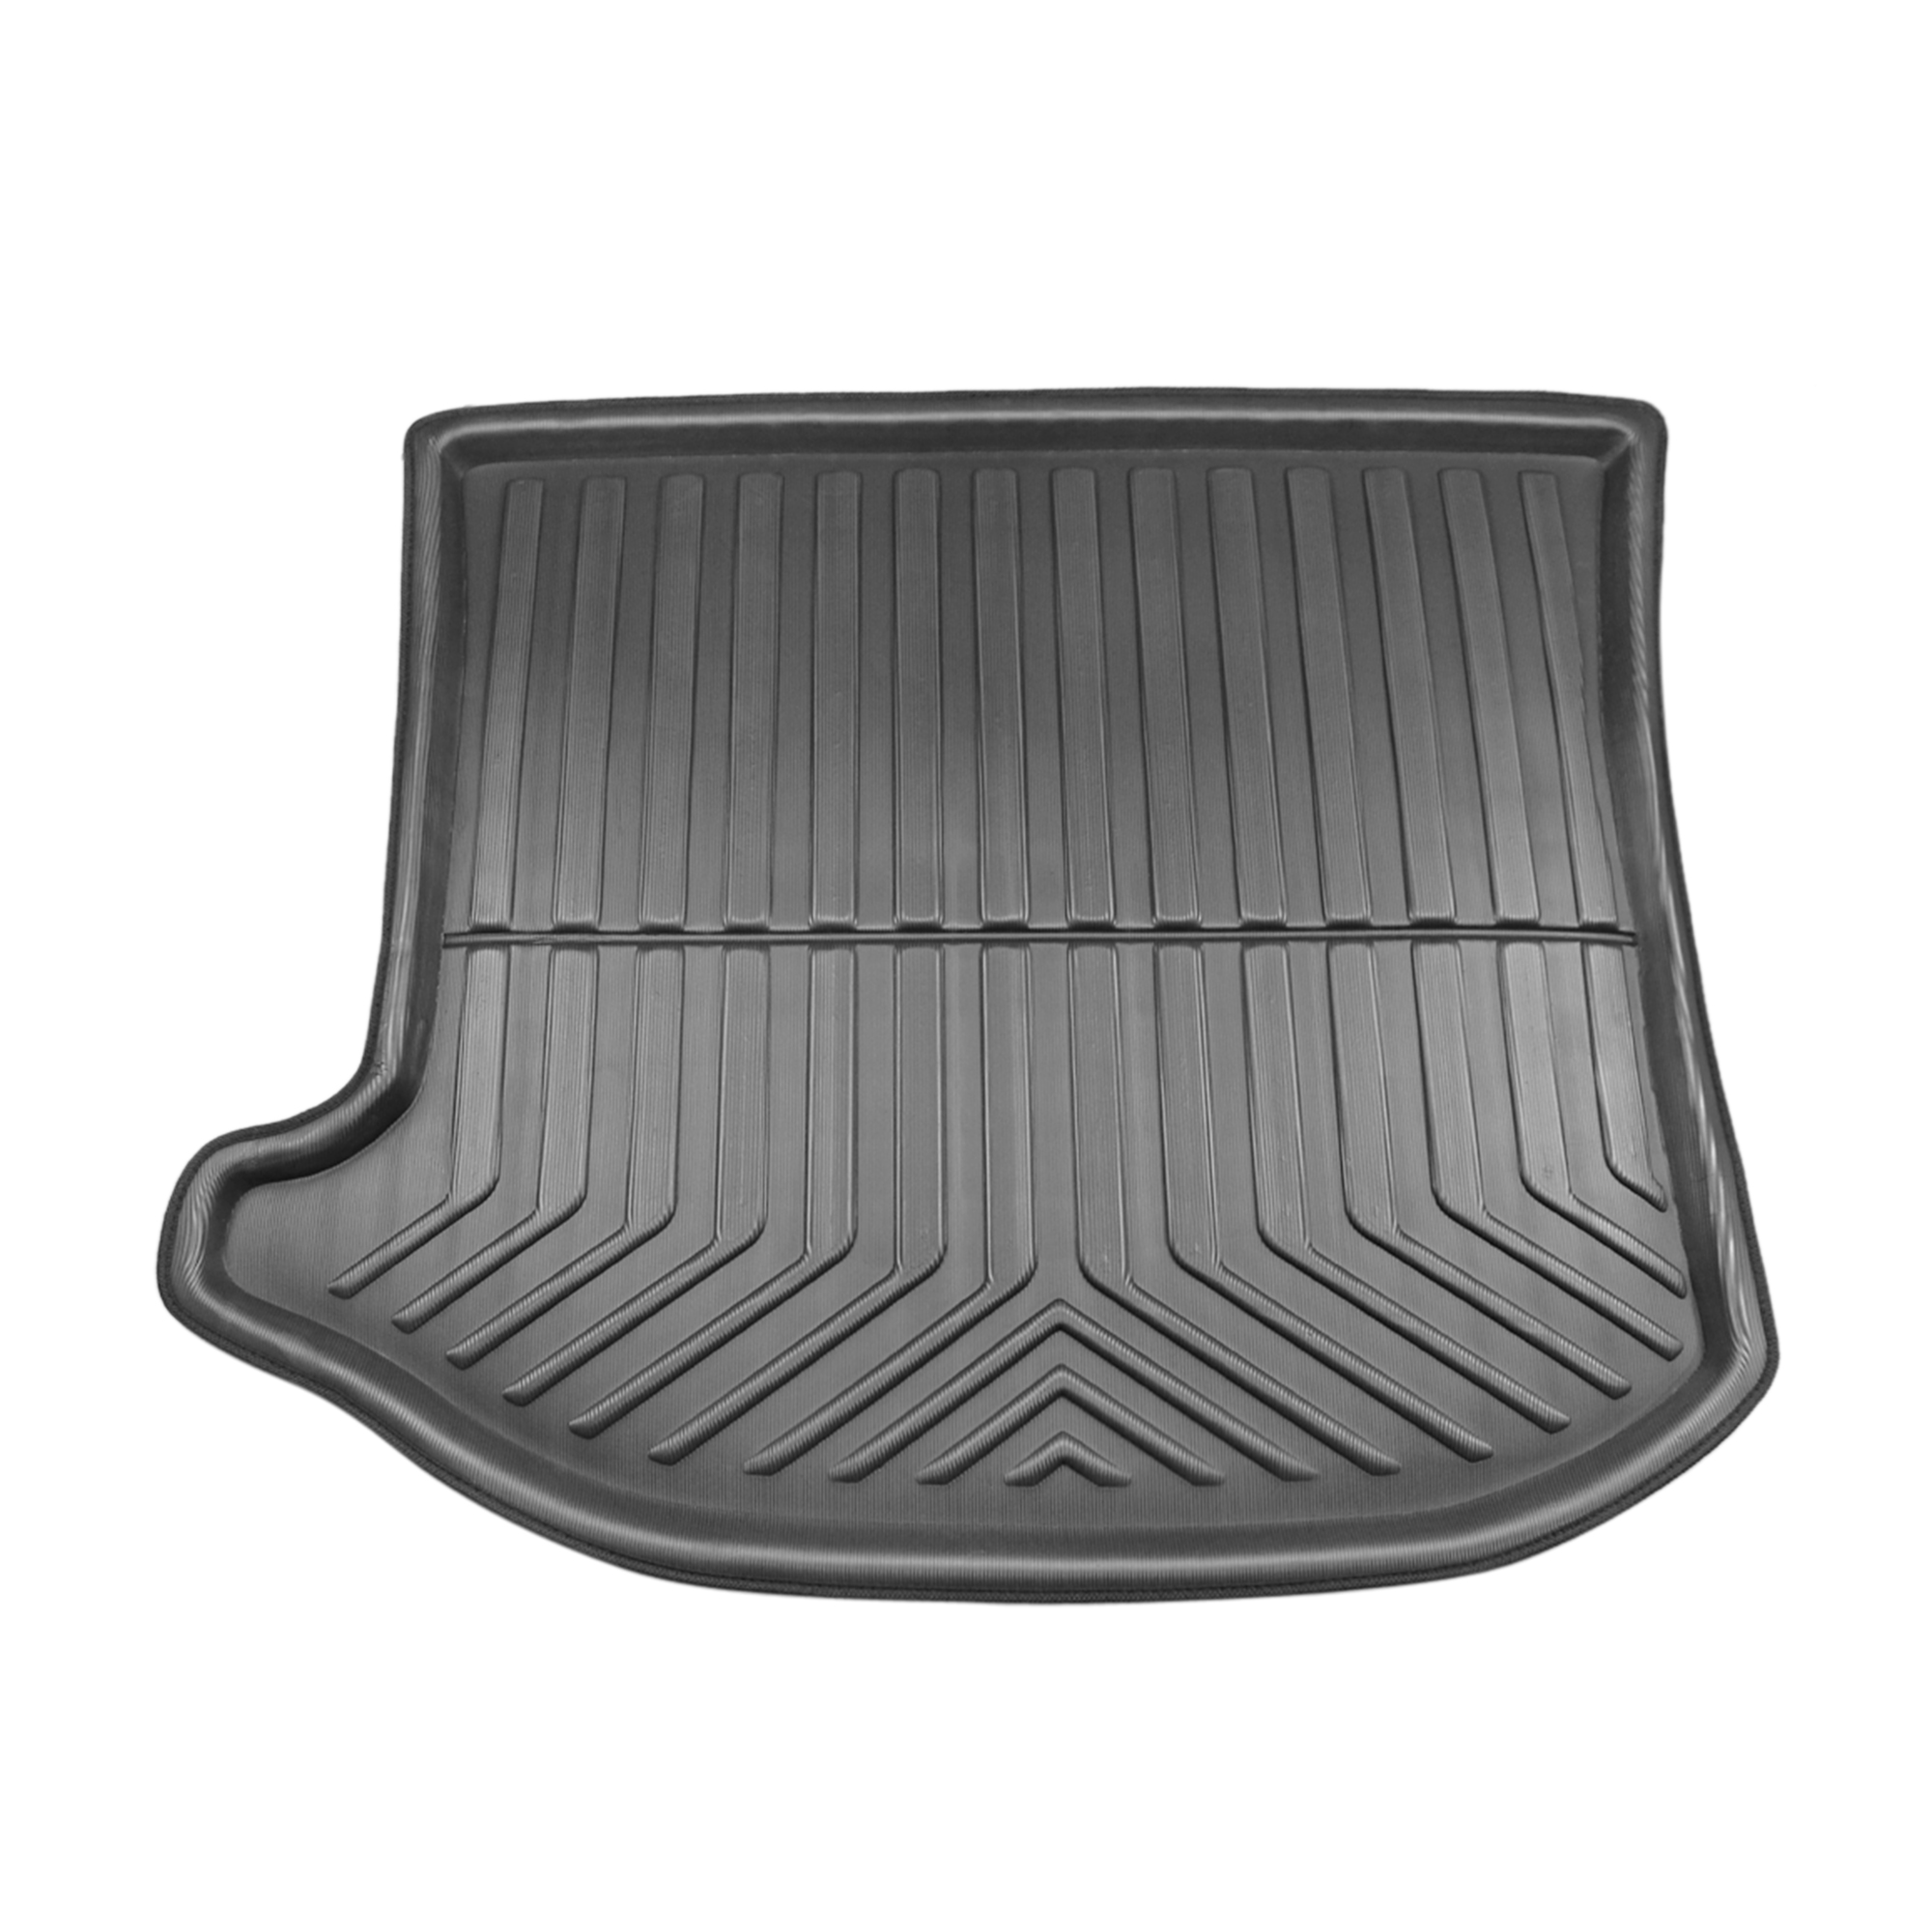 Unique Bargains Black Rear Trunk Boot Liner Cargo Mat Floor Tray for Jeep Grand Cherokee 13-17